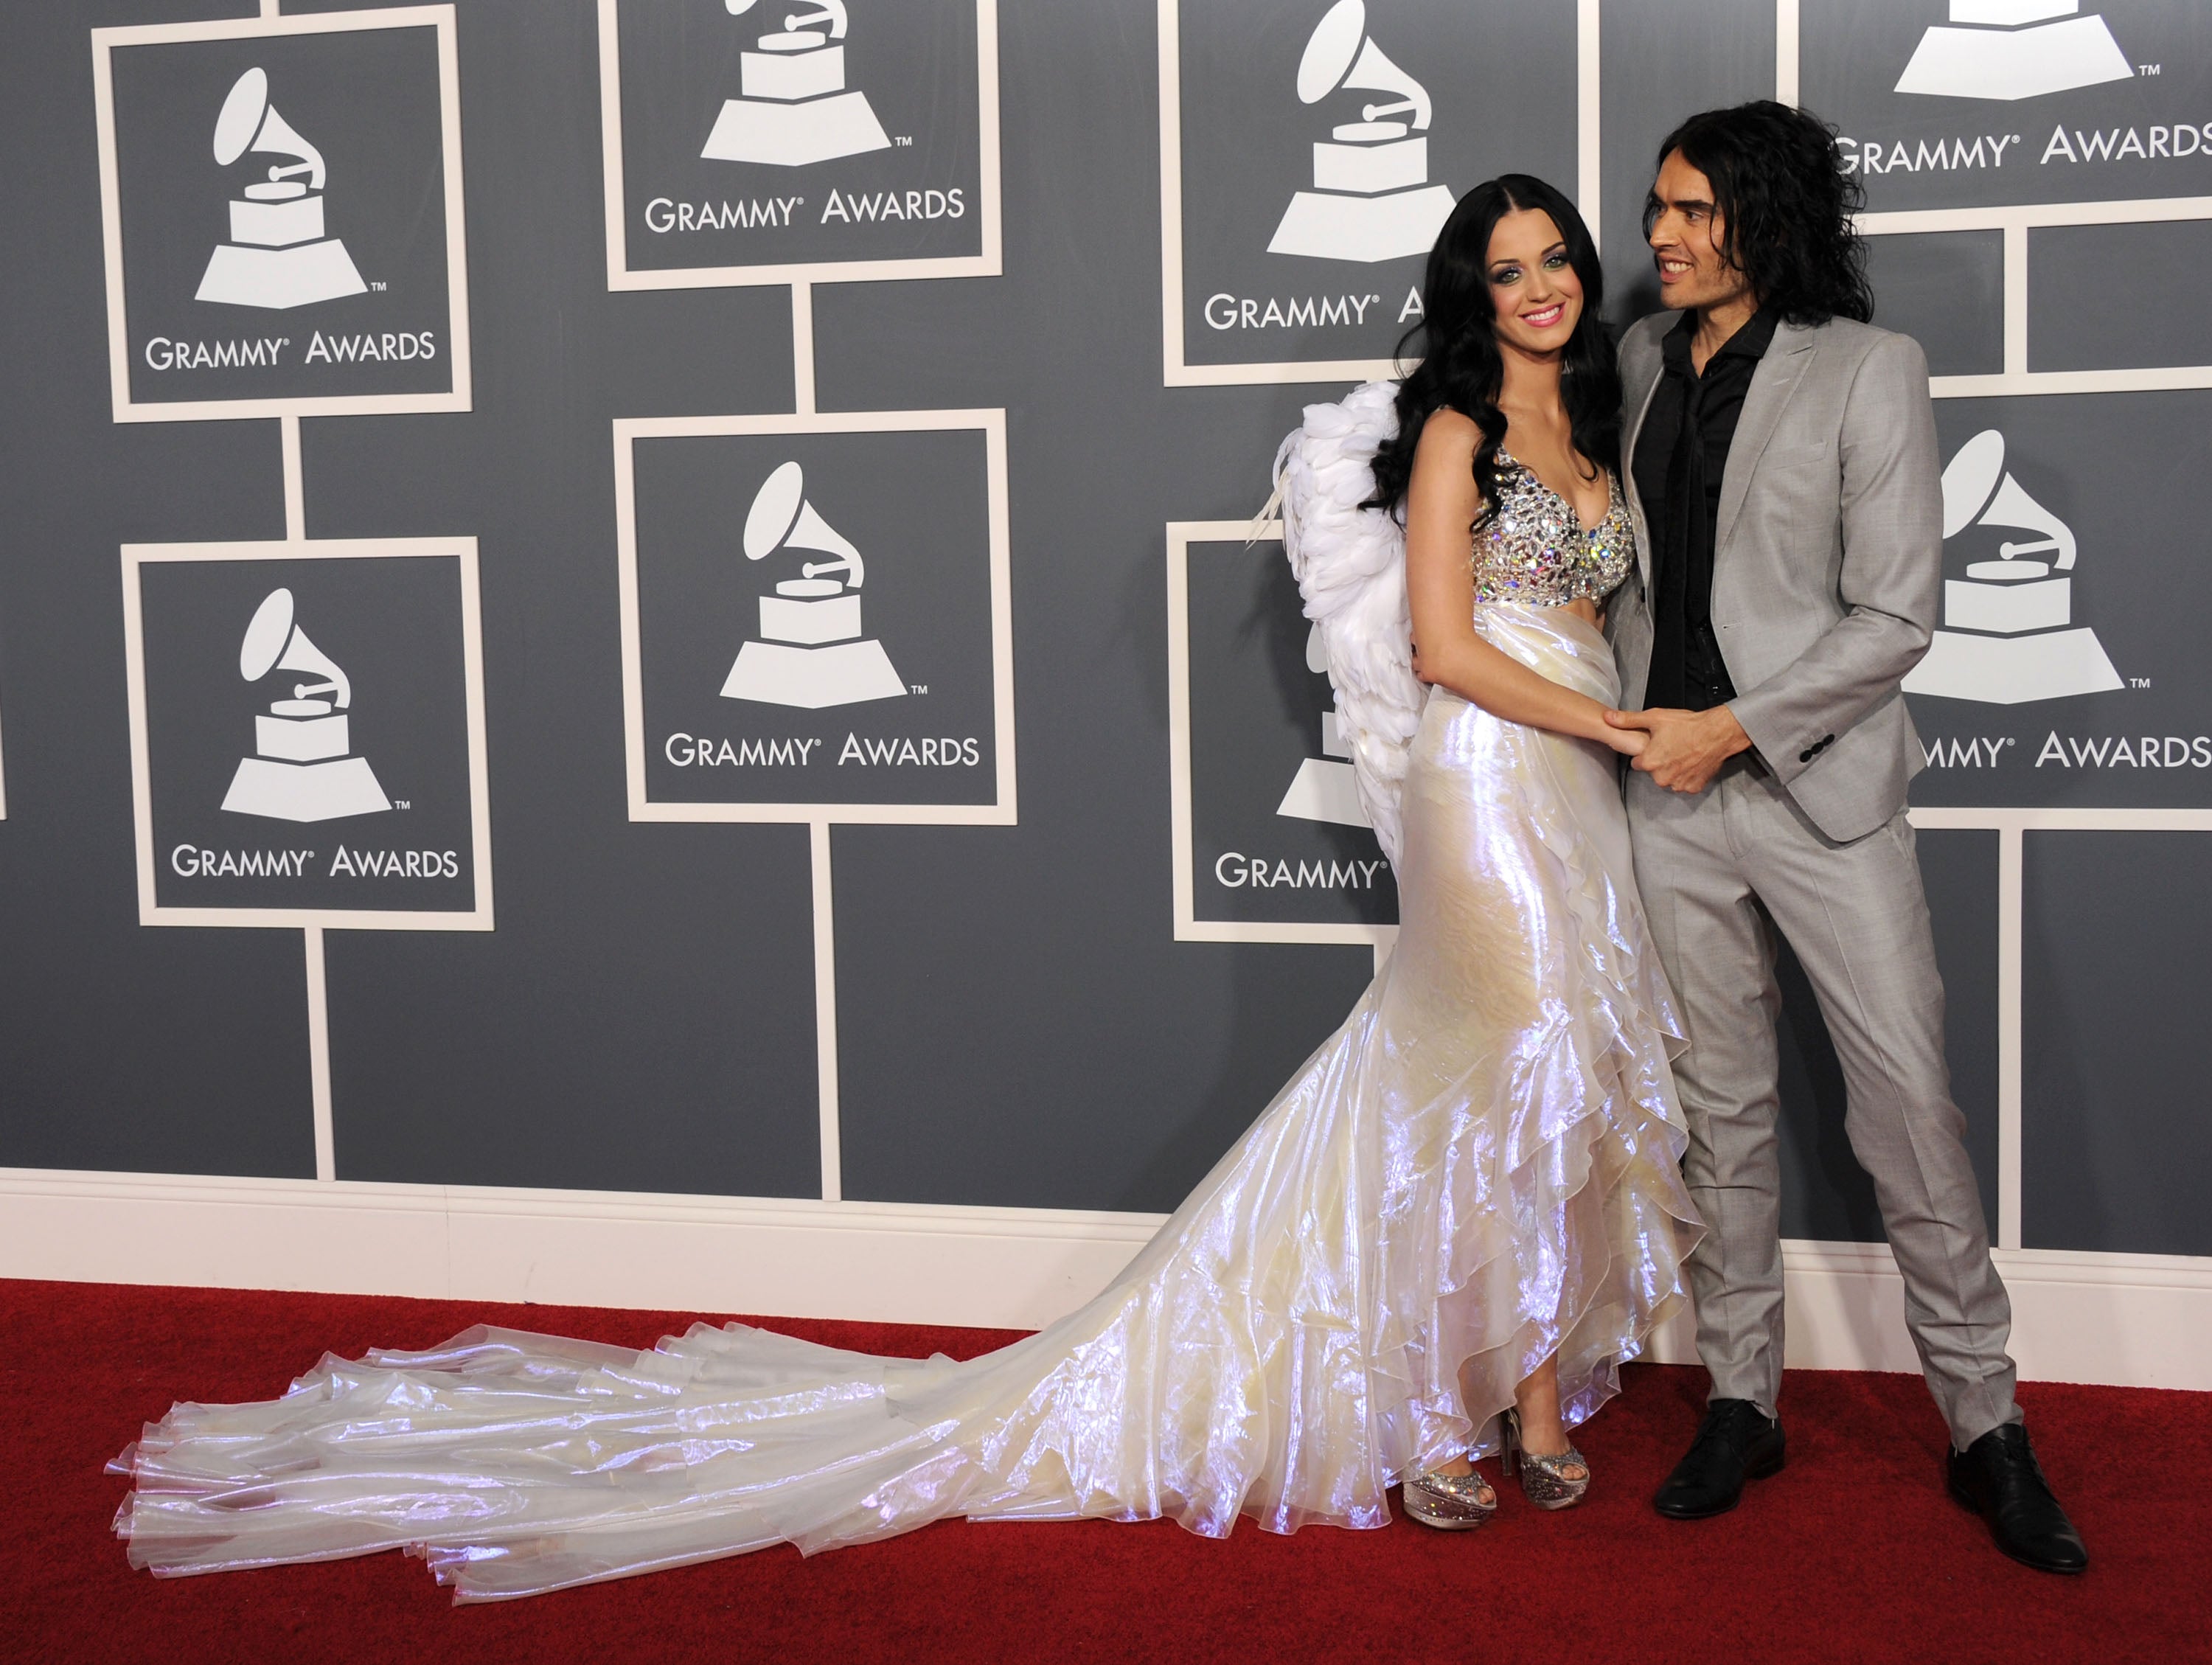 Perry and Brand at the Grammy Awards in 2011